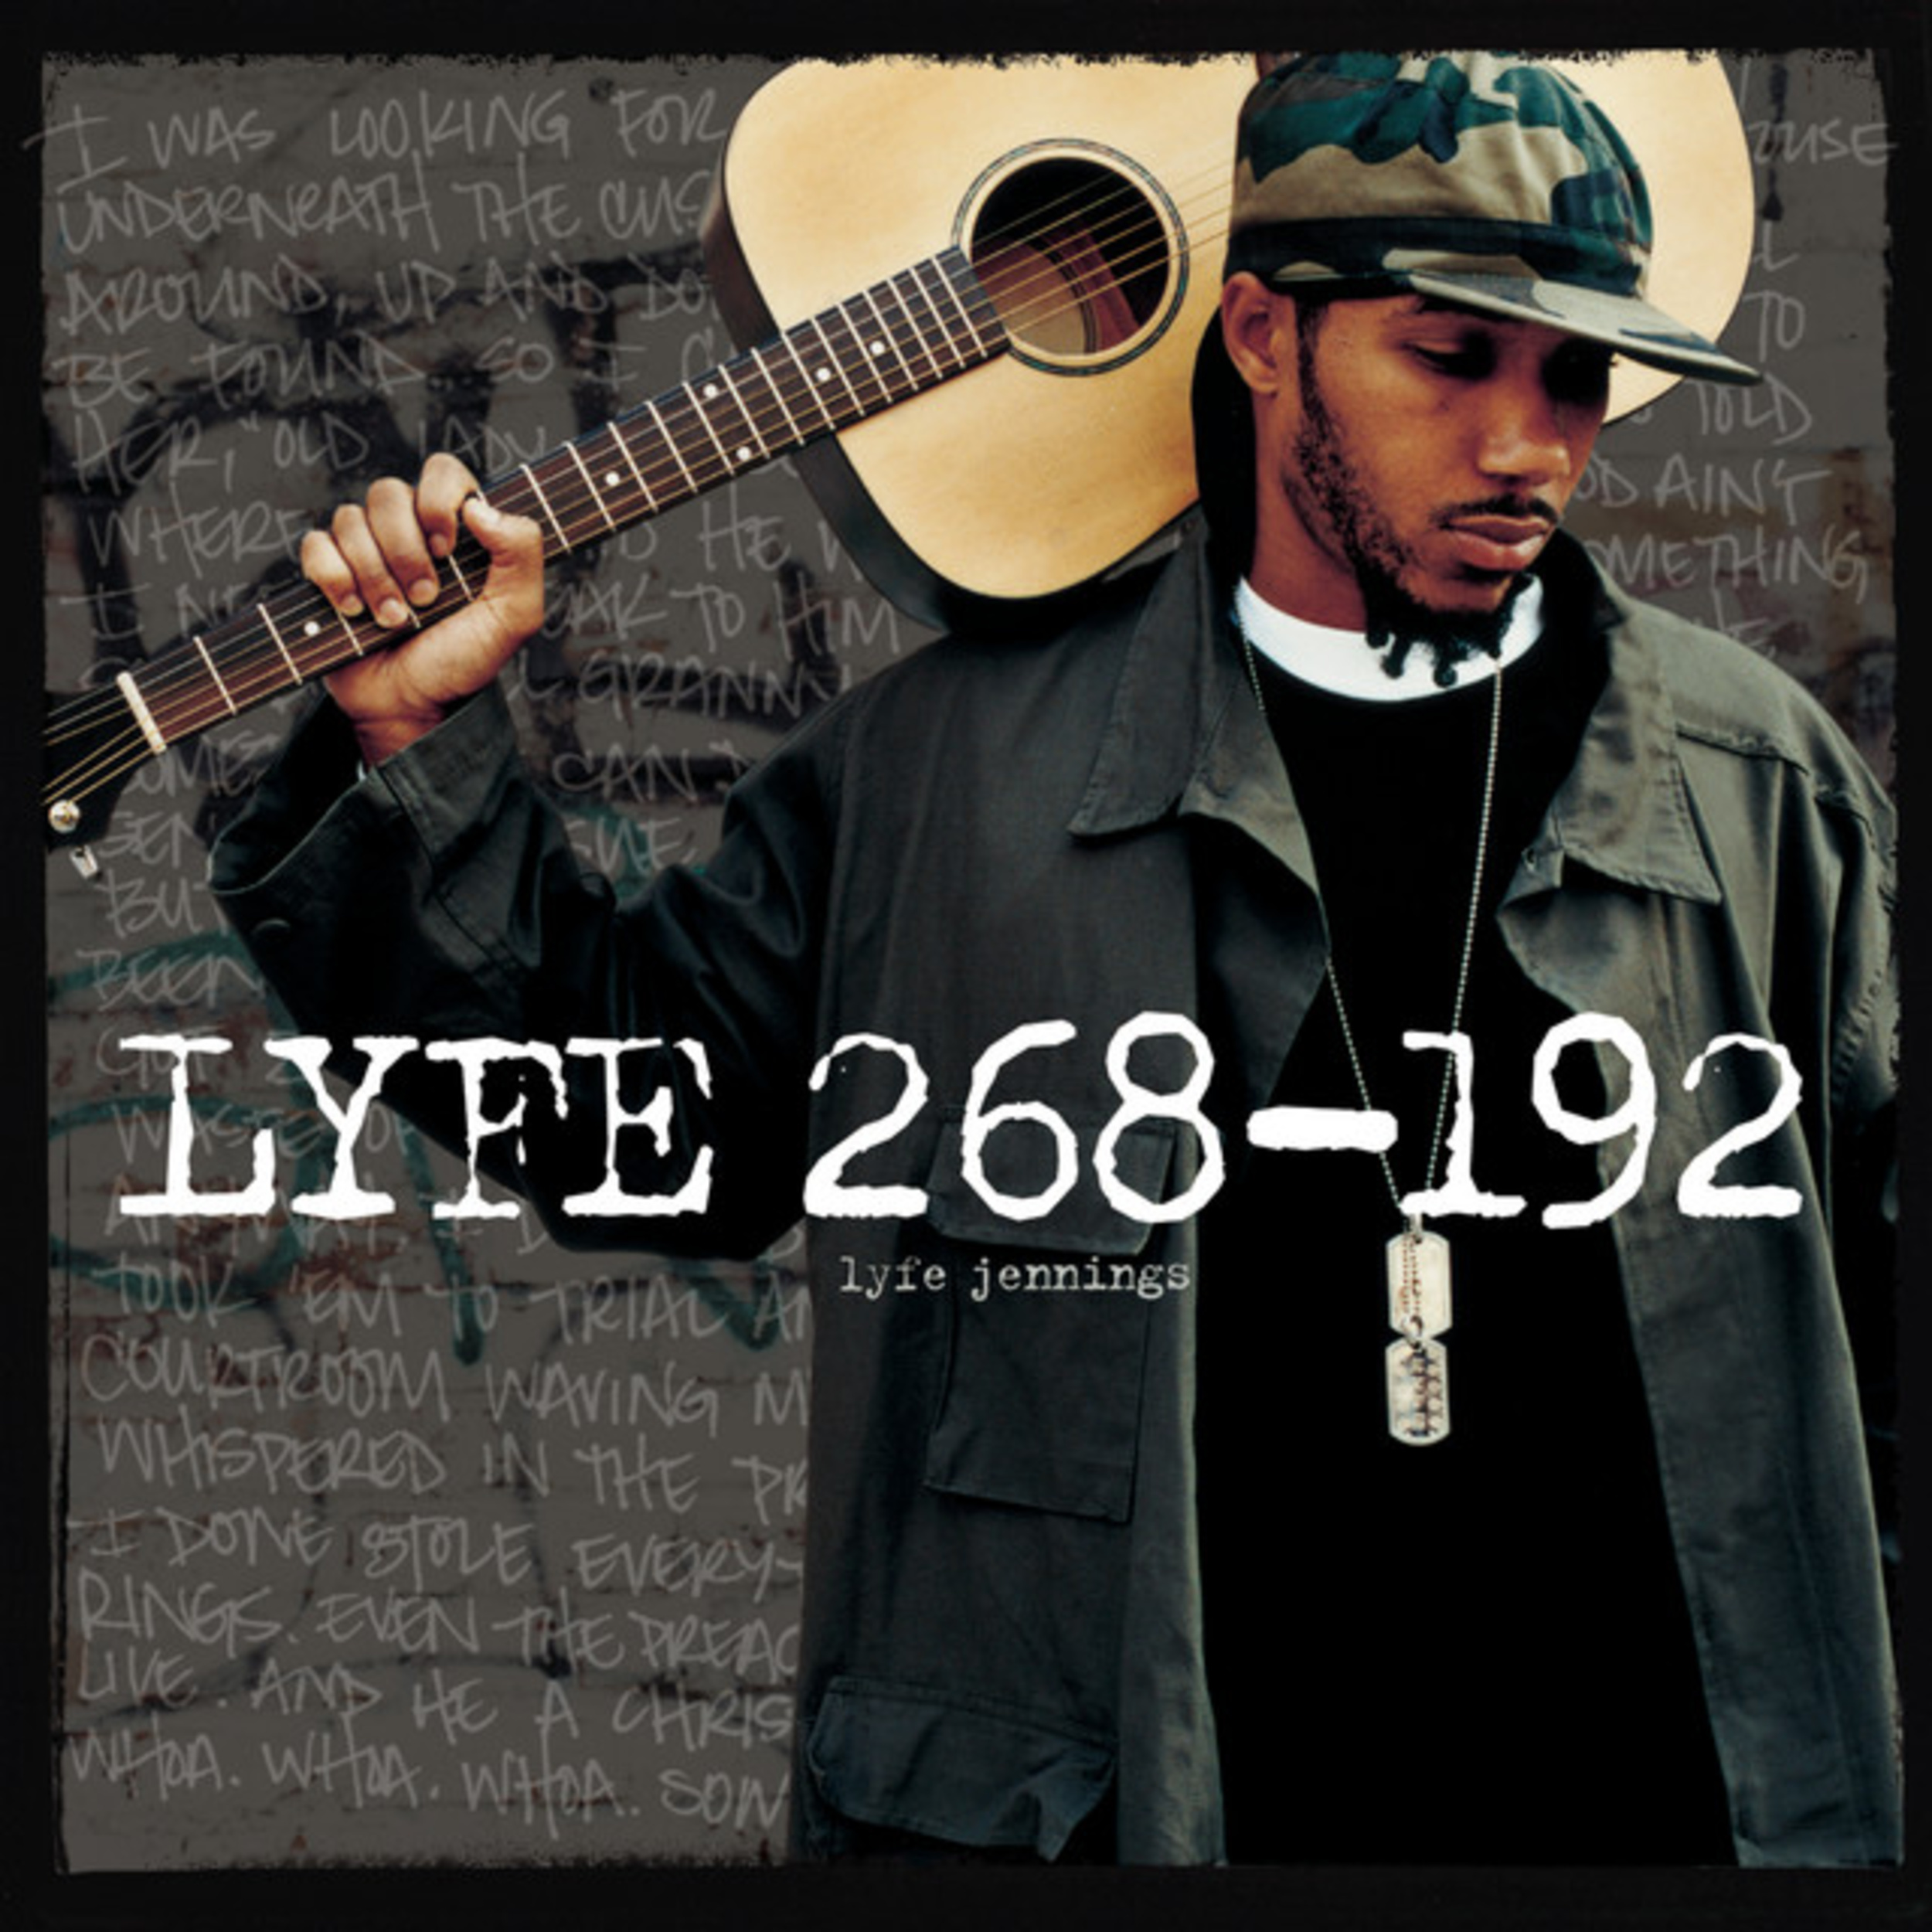 <p>R&B singer Lyfe Jennings gave a glimpse into his love life on his debut album, <em>Lyfe 268-192.</em> Jennings has the type of grit in his soulful tone that was often heard more with singers that were popular in the '70s and '80s. He added commentary before each song to help introduce the theme. The album's second single,<a href="https://www.youtube.com/watch?v=GkpN3uiZ-Ew"> "Must Be Nice,"</a> helped push Jennings to be on the radar for the newest sensation in R&B. </p><p>You may also like: <a href='https://www.yardbarker.com/entertainment/articles/the_25_most_devastating_endings_in_film_history_120723/s1__35694233'>The 25 most devastating endings in film history</a></p>